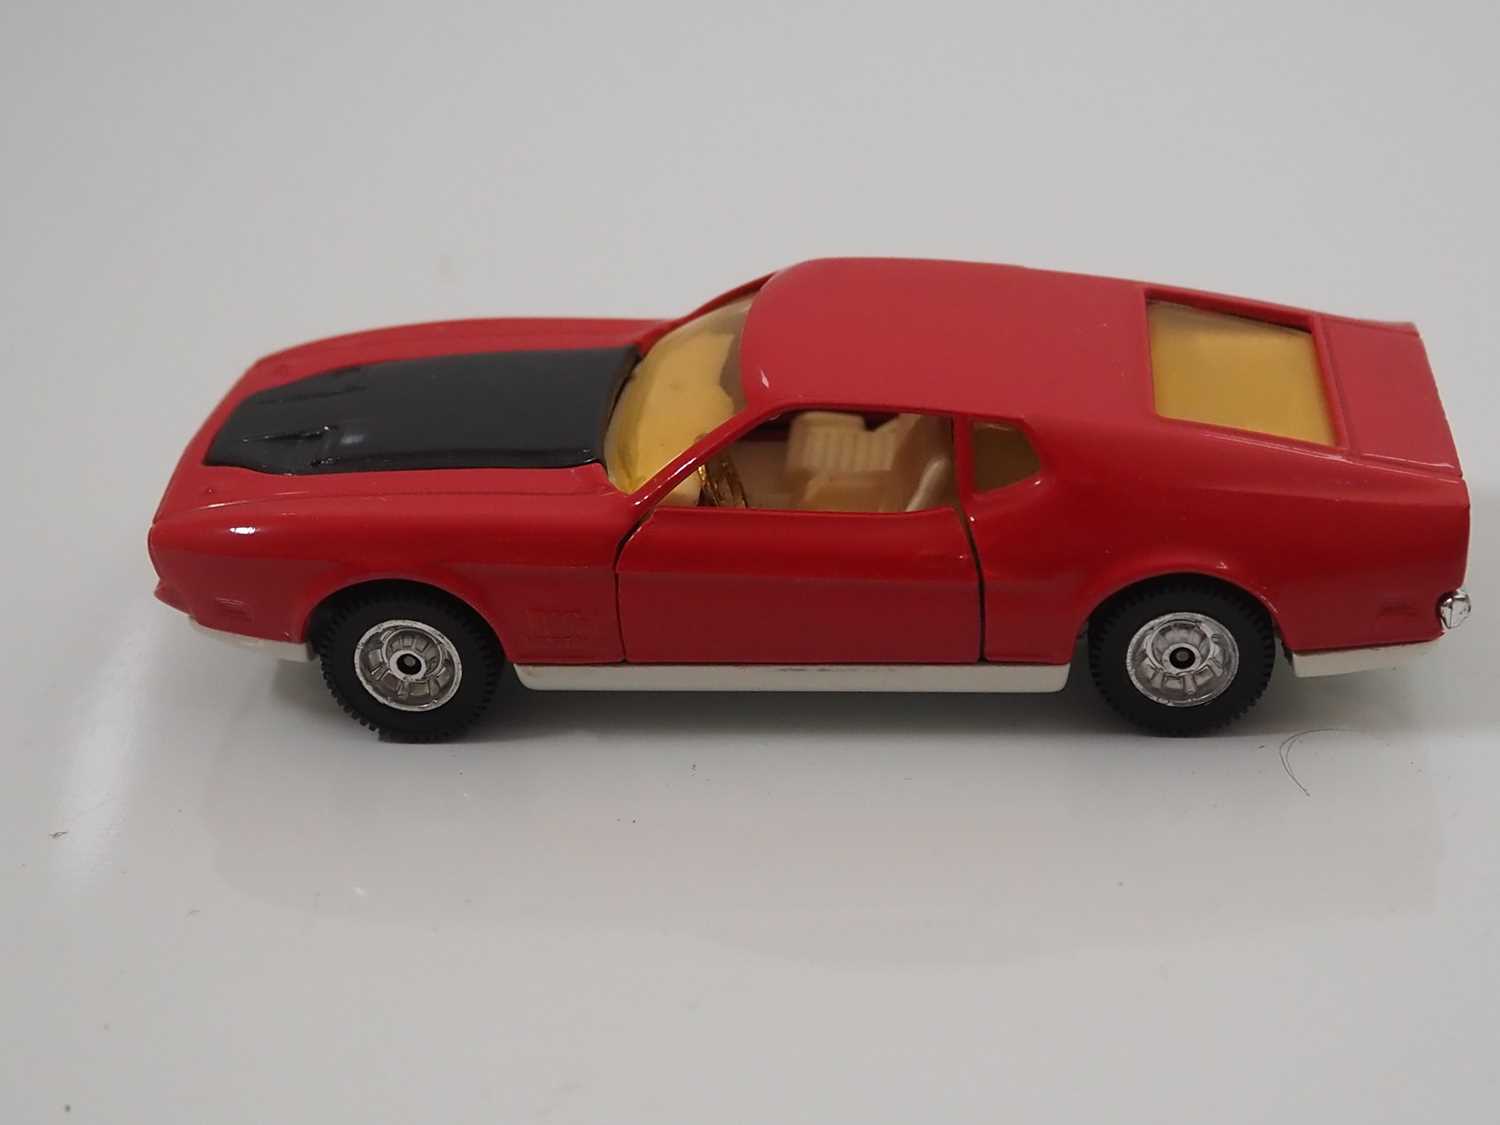 A CORGI 391 diecast 'James Bond Diamonds Are Forever' Ford Mustang Mach 1 with red body, white - Image 2 of 5